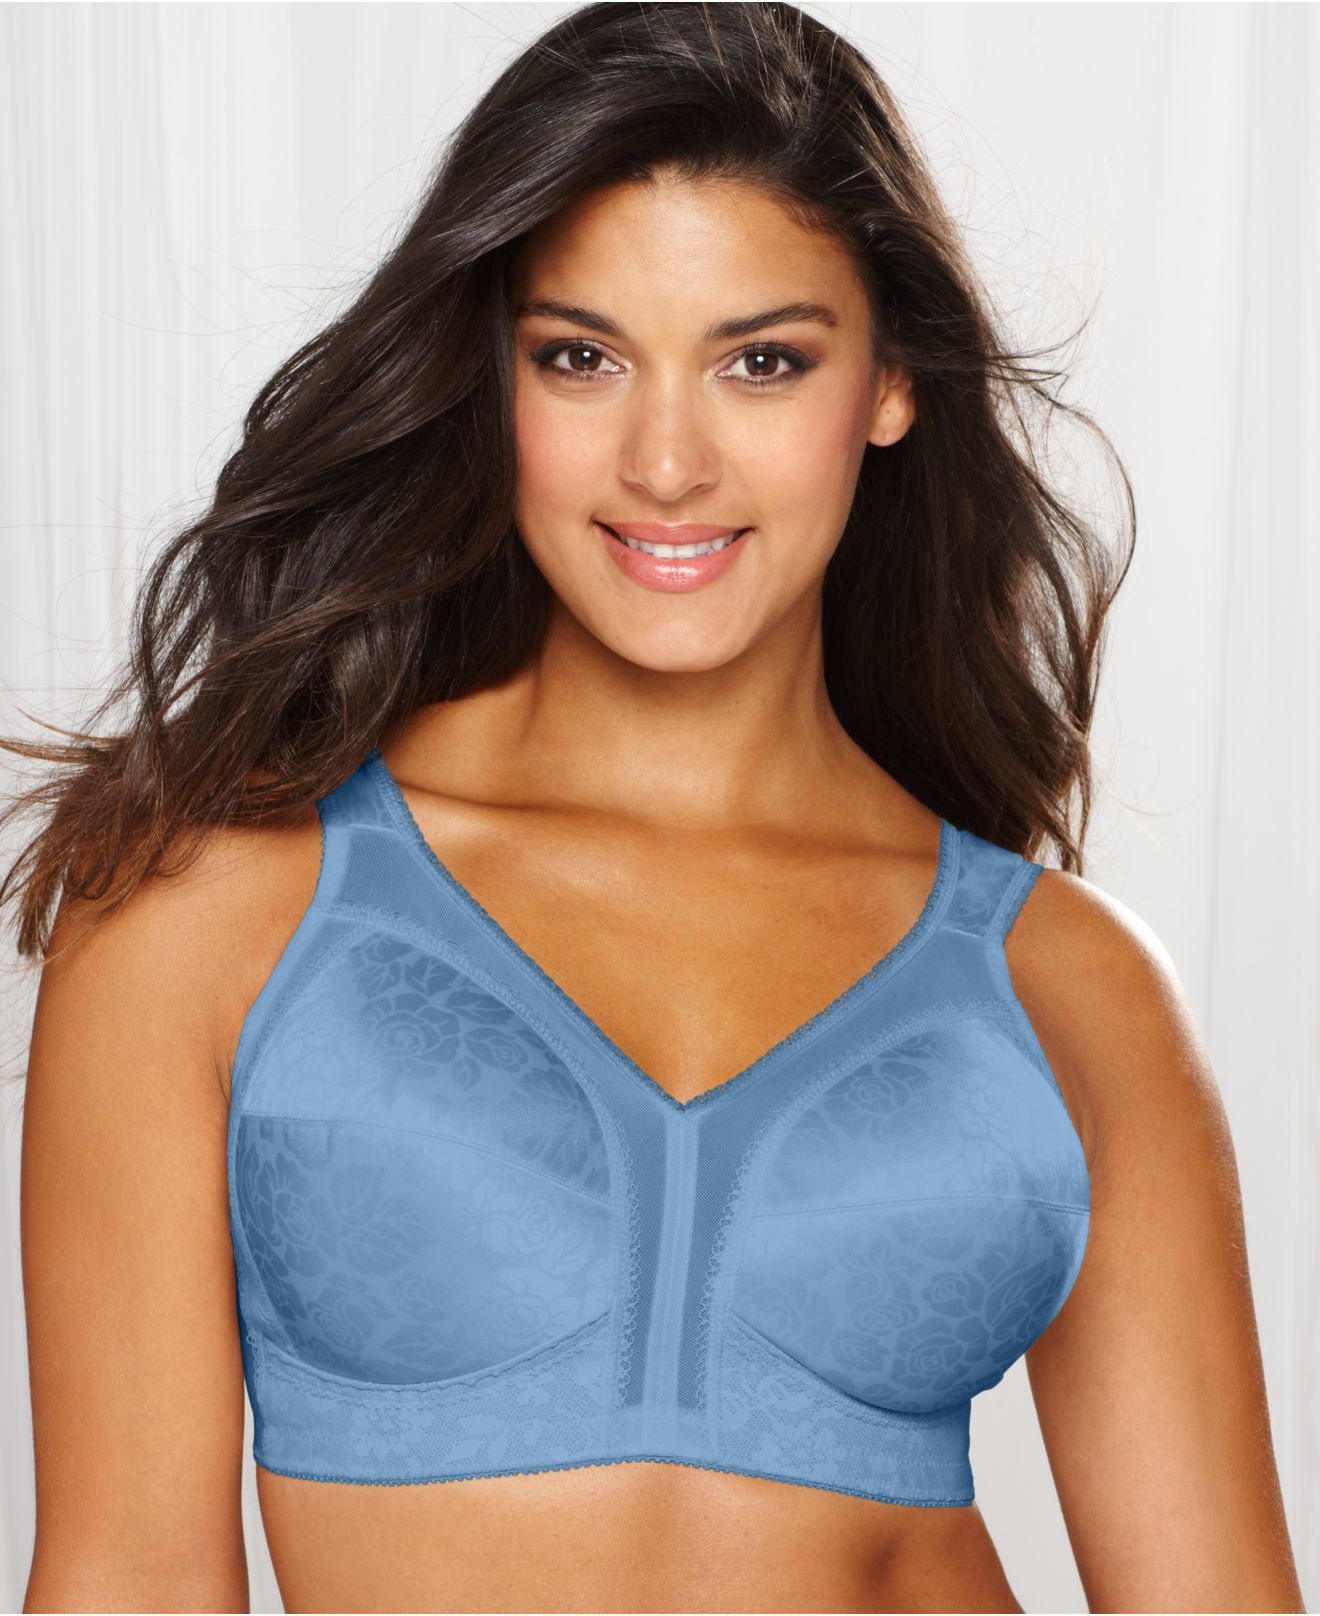 I tried to find a wirefree, un padded, full coverage bra that was still sex...